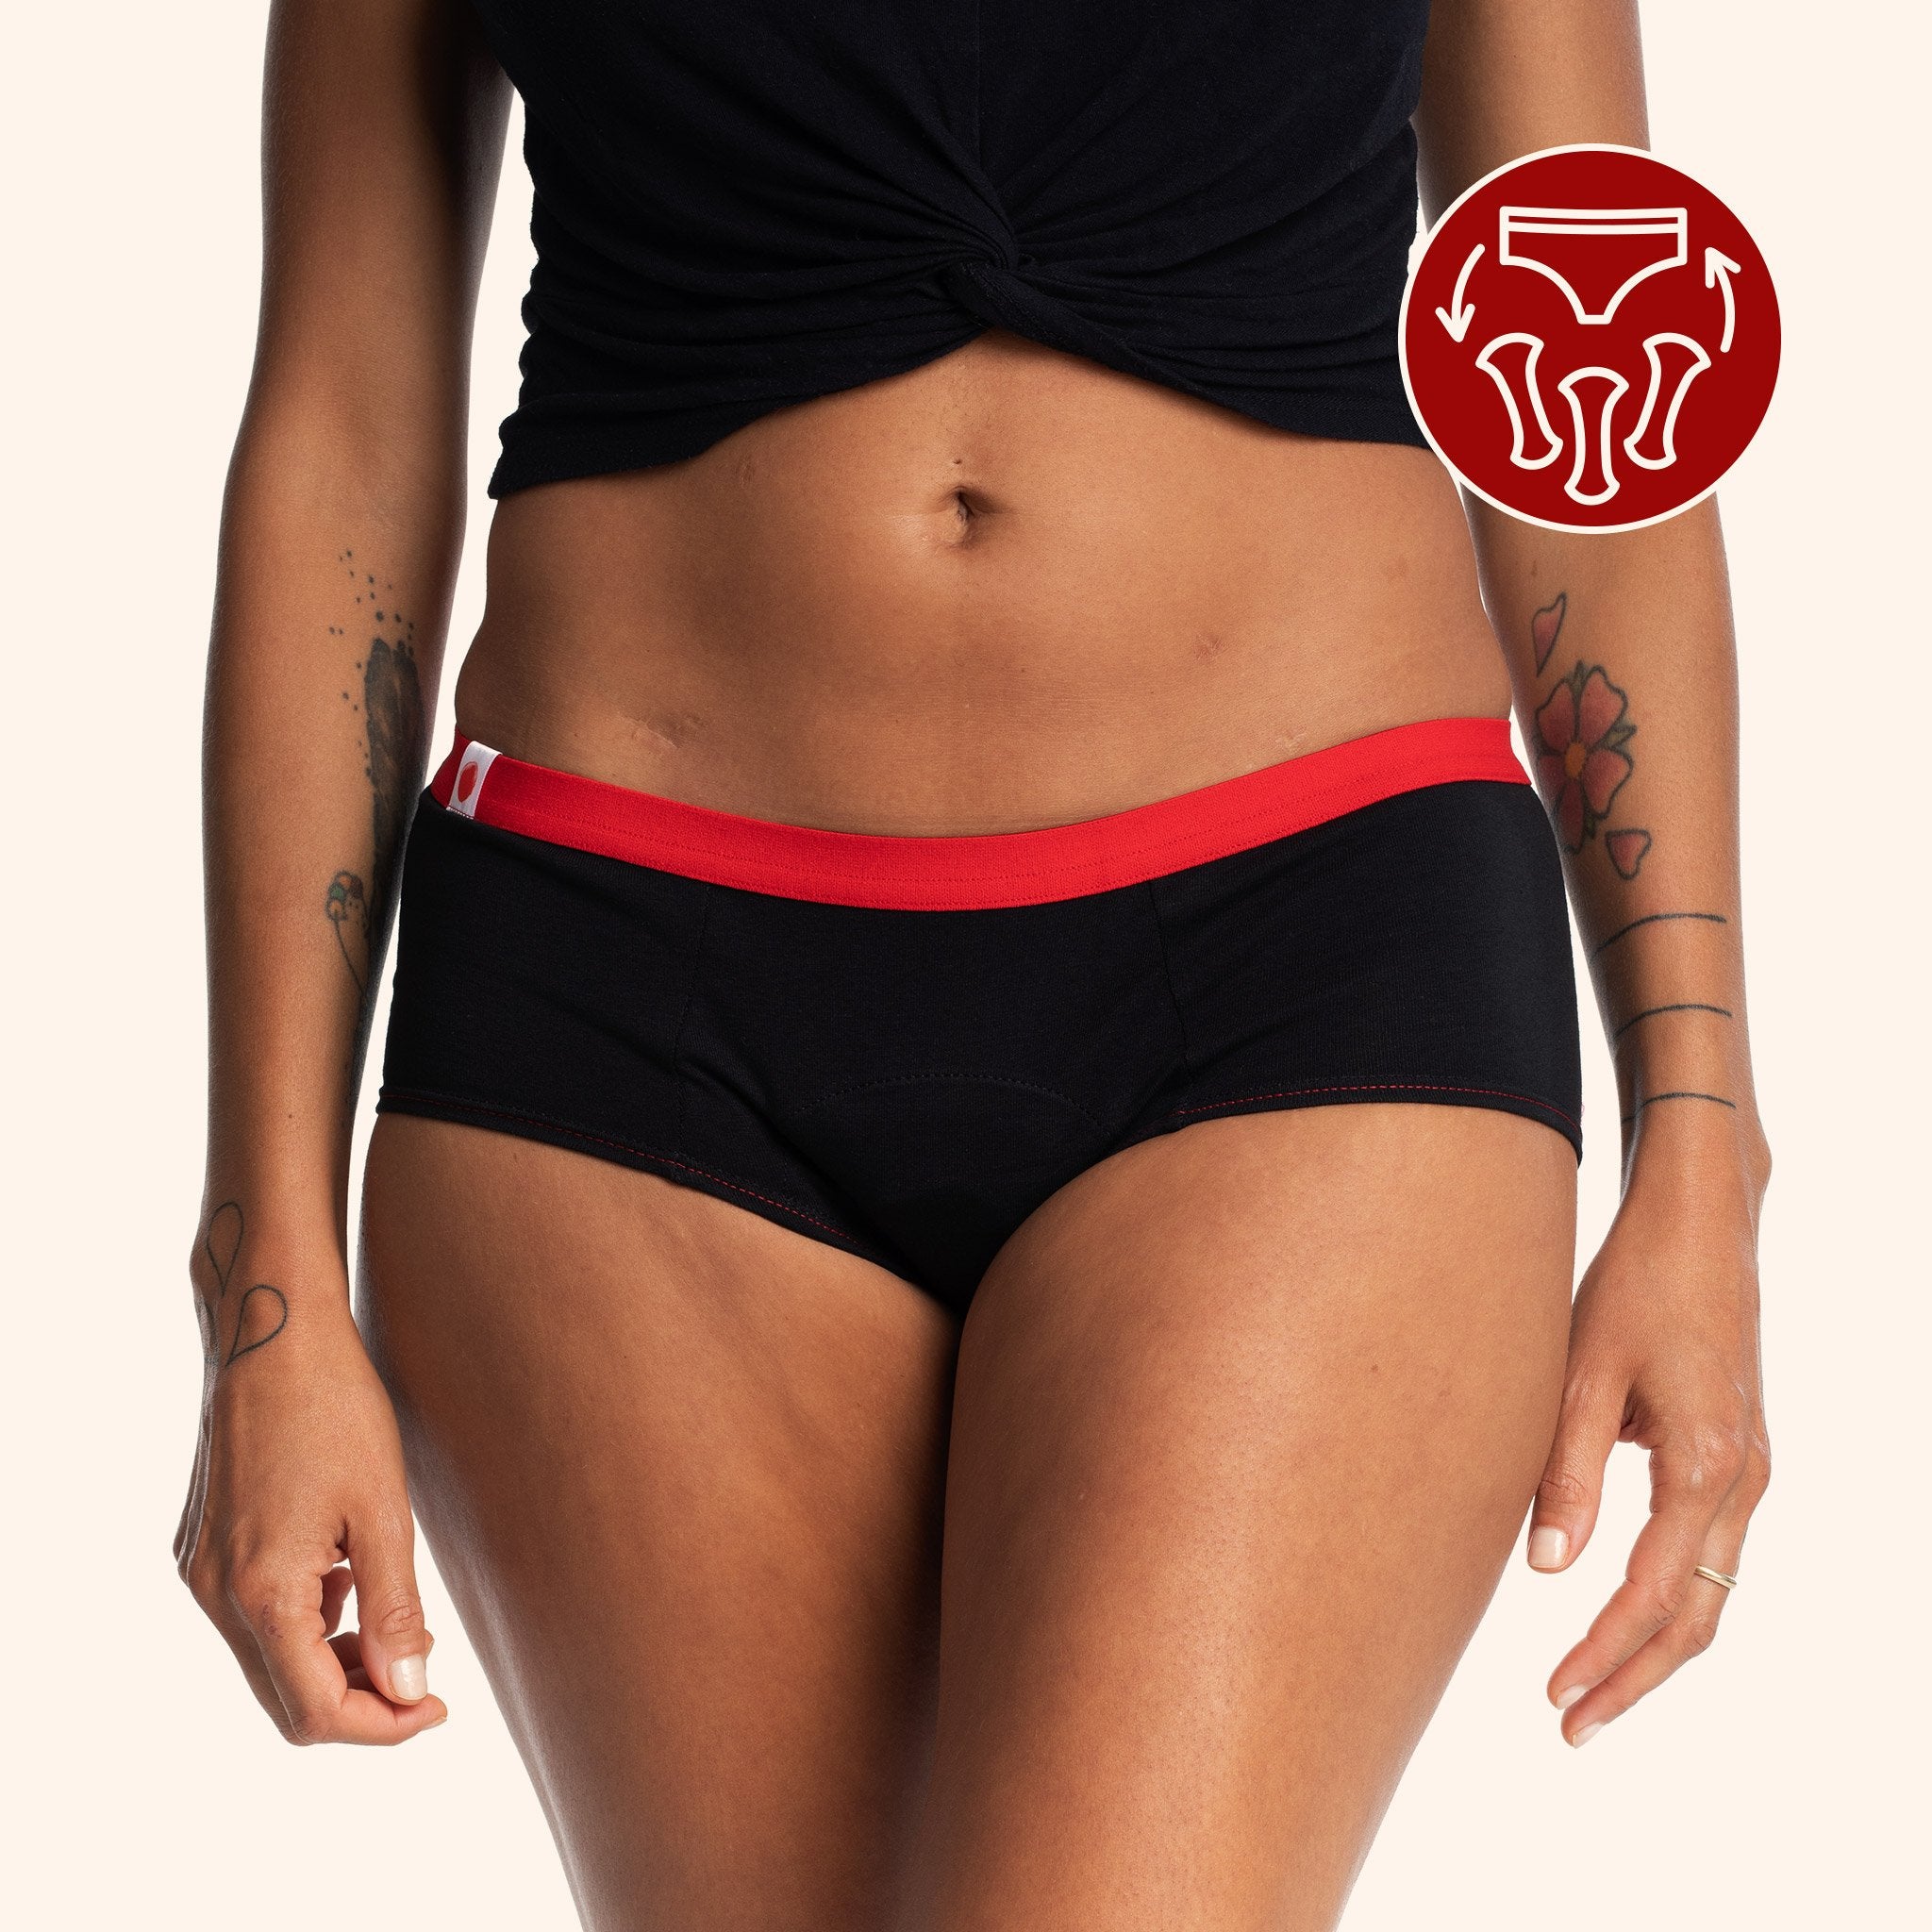 CODE RED Period Panties Menstrual Underwear With Pocket-Red-3XL 